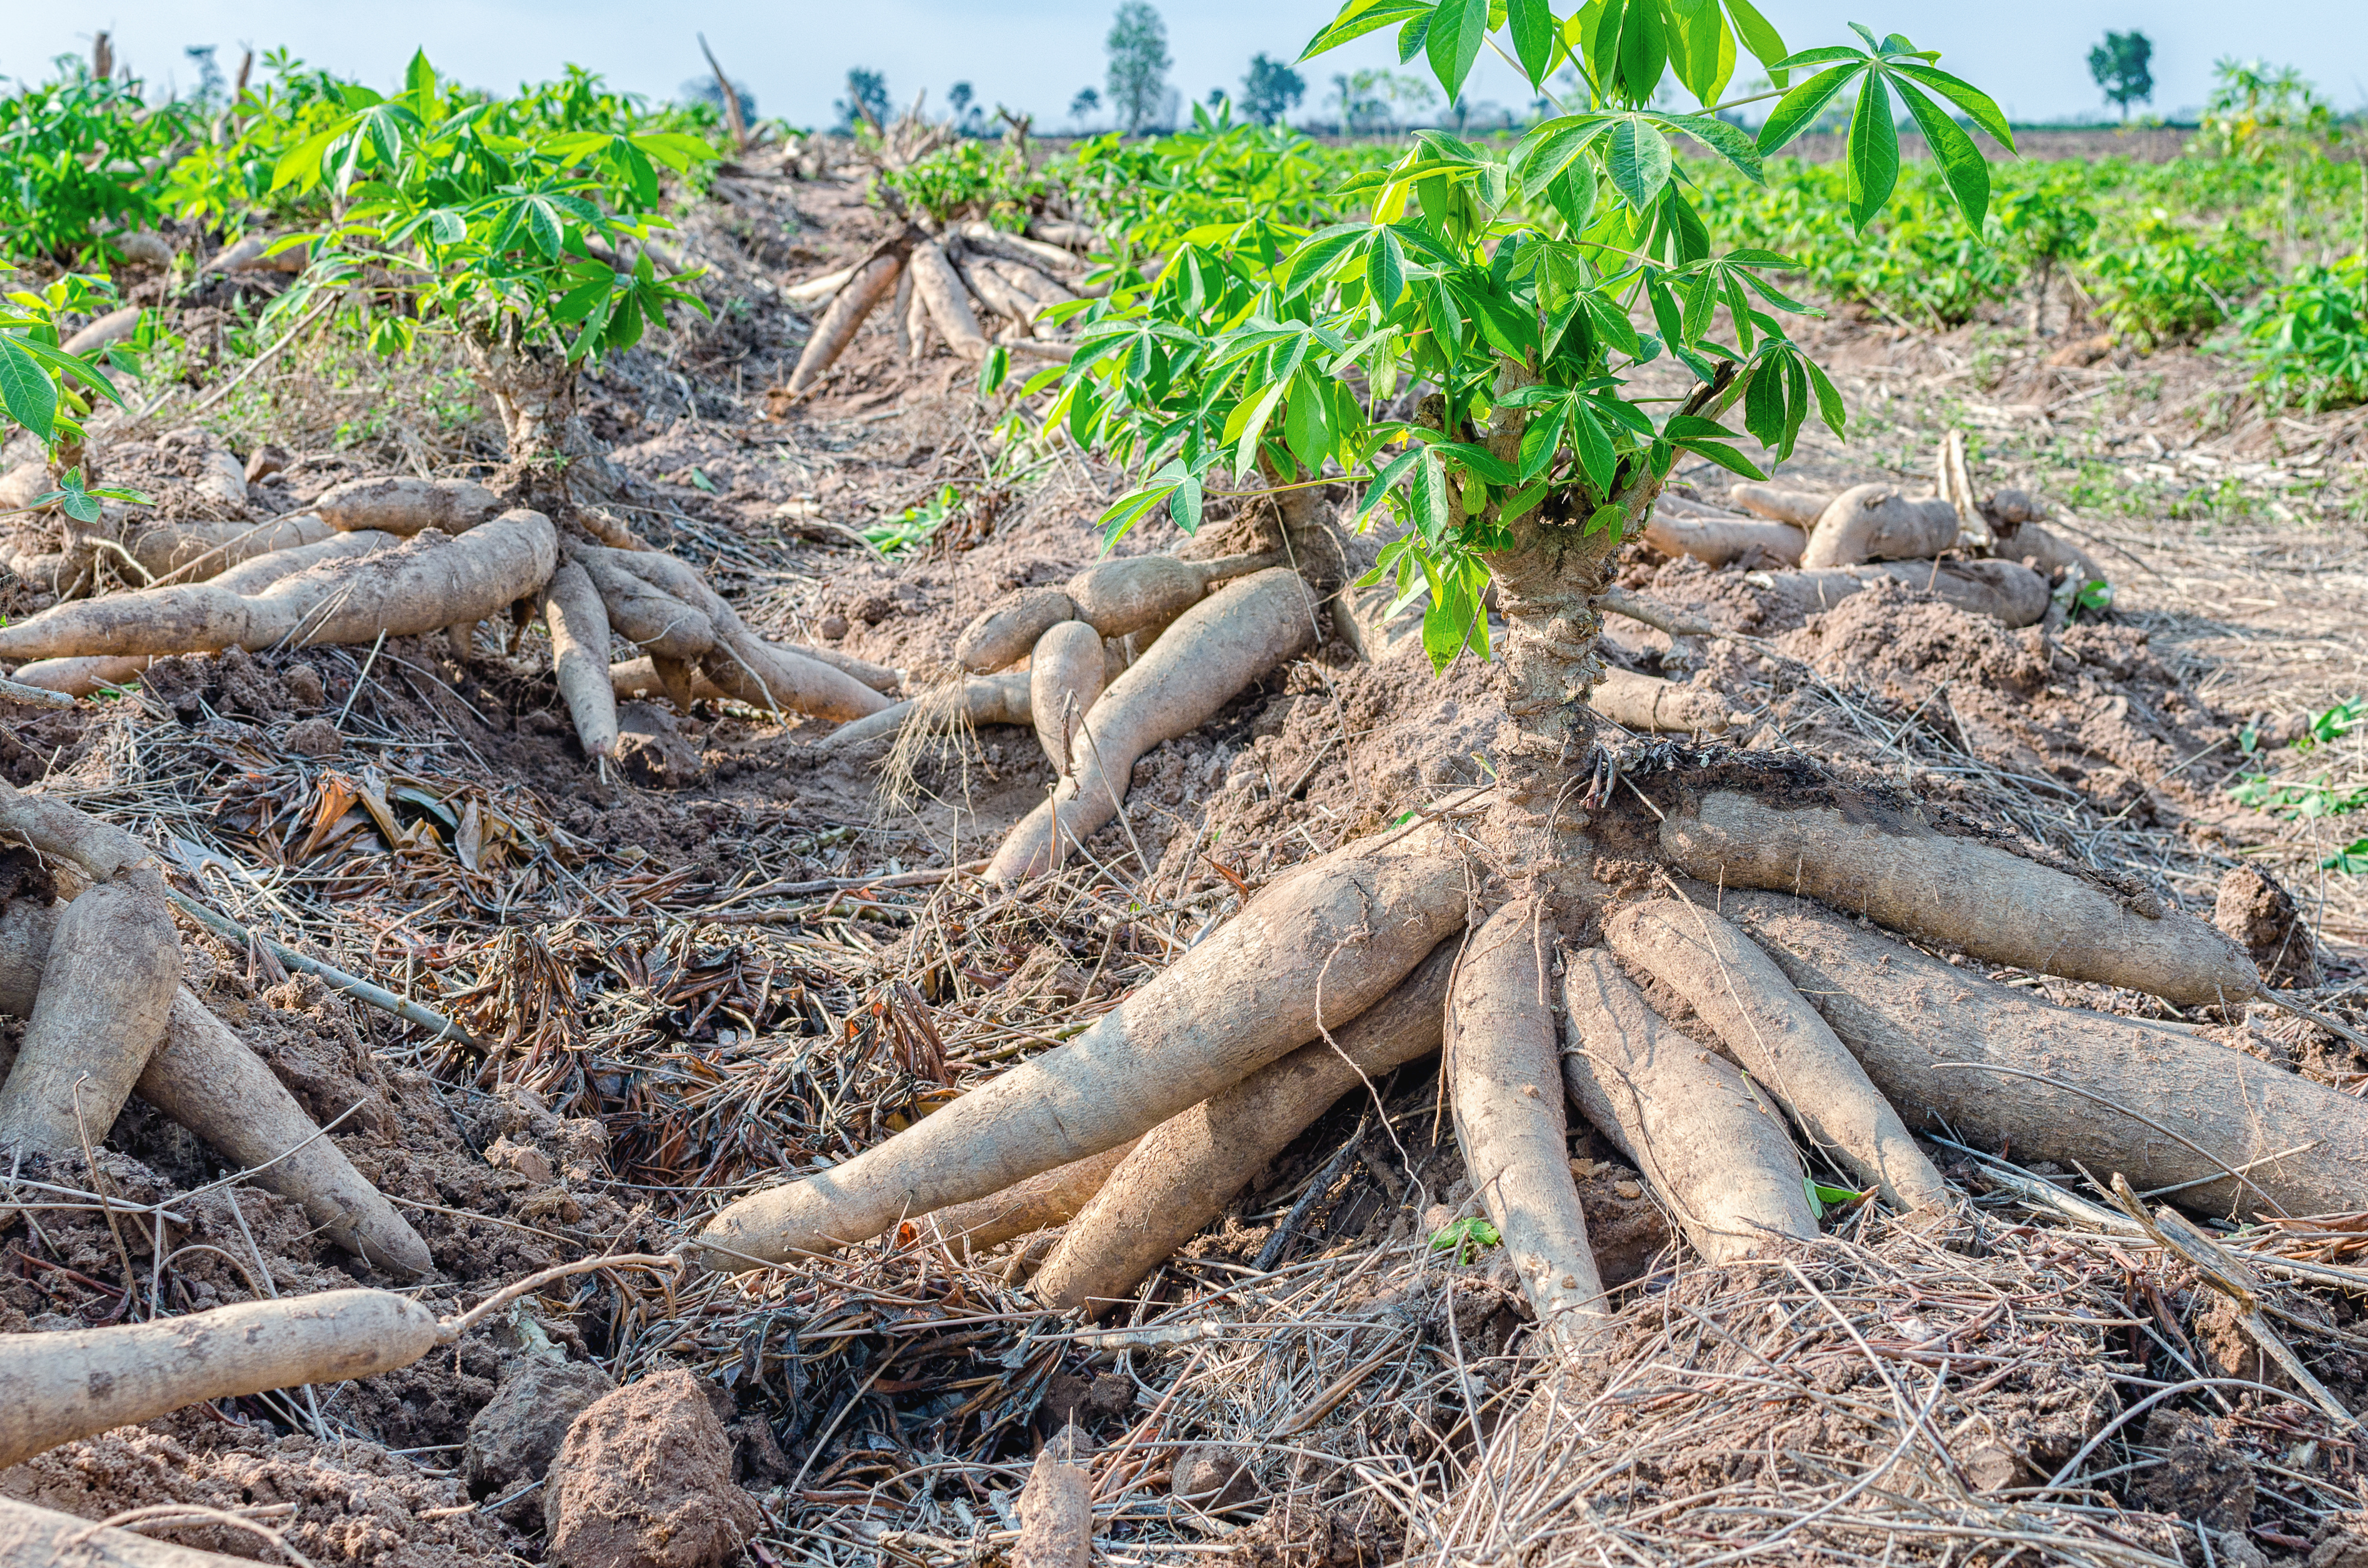 The sun shines on rows of ground-growing cassava in a field